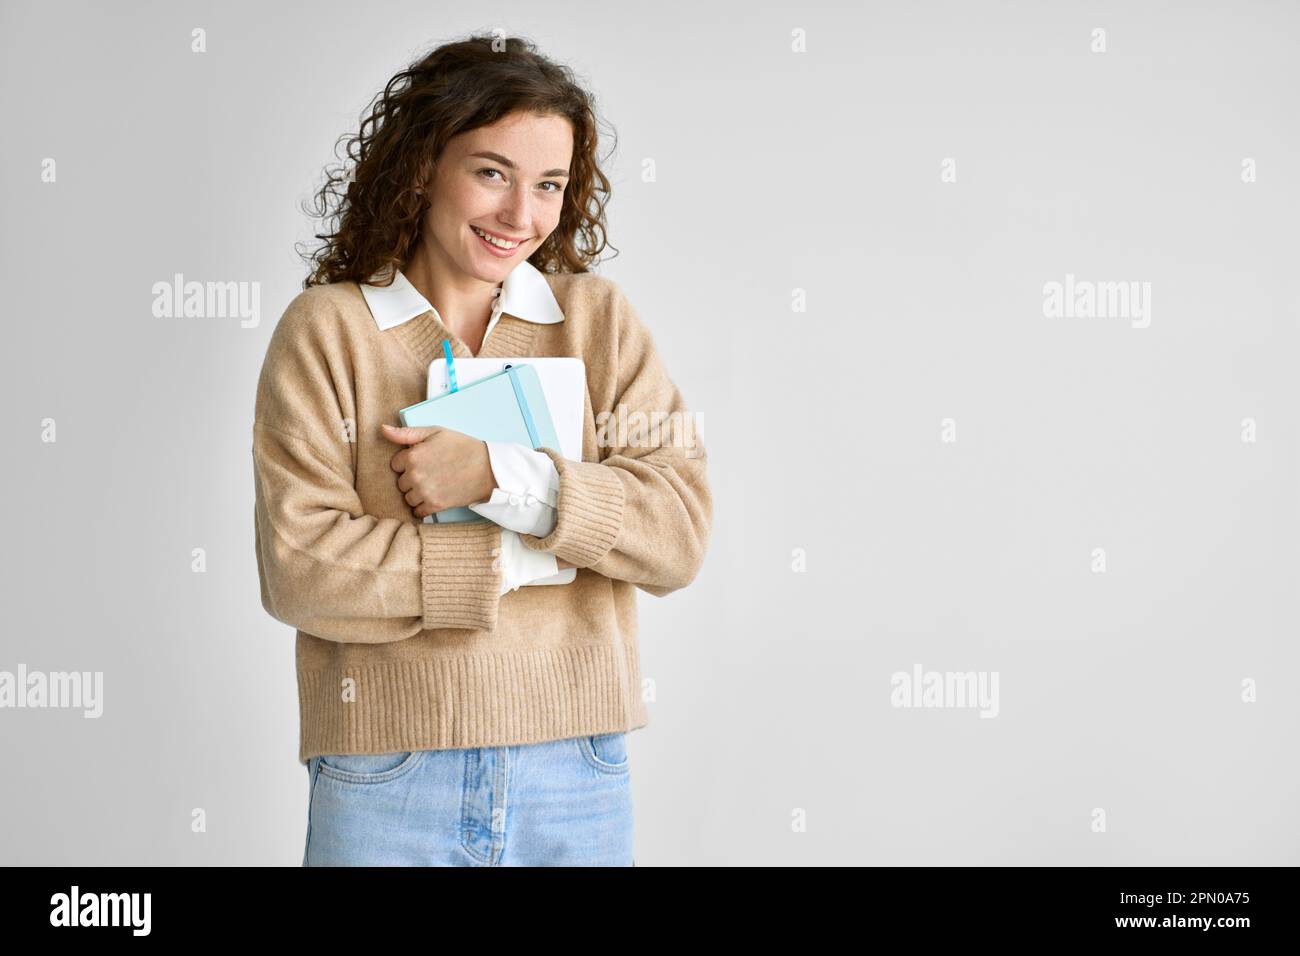 Young happy pretty cute girl student holding digital tablet isolated on white. Stock Photo